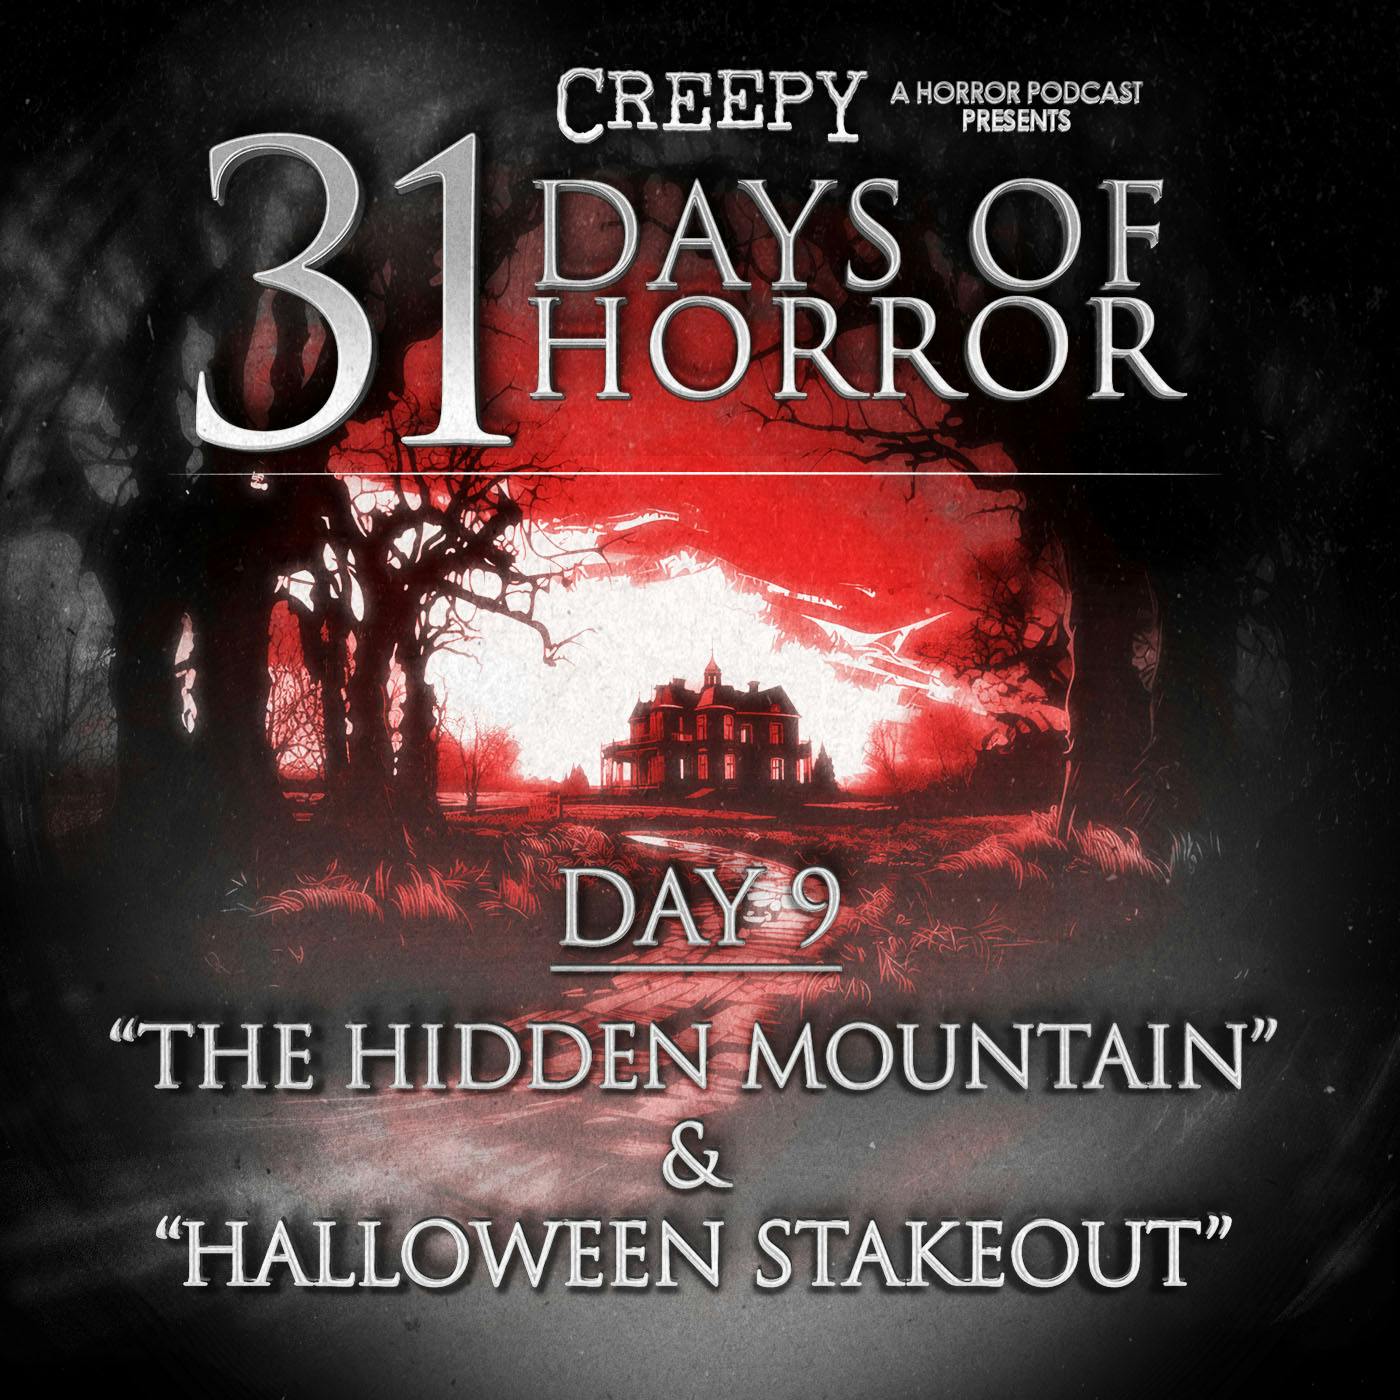 Day 9 - The Hidden Mountain & Halloween Stakeout